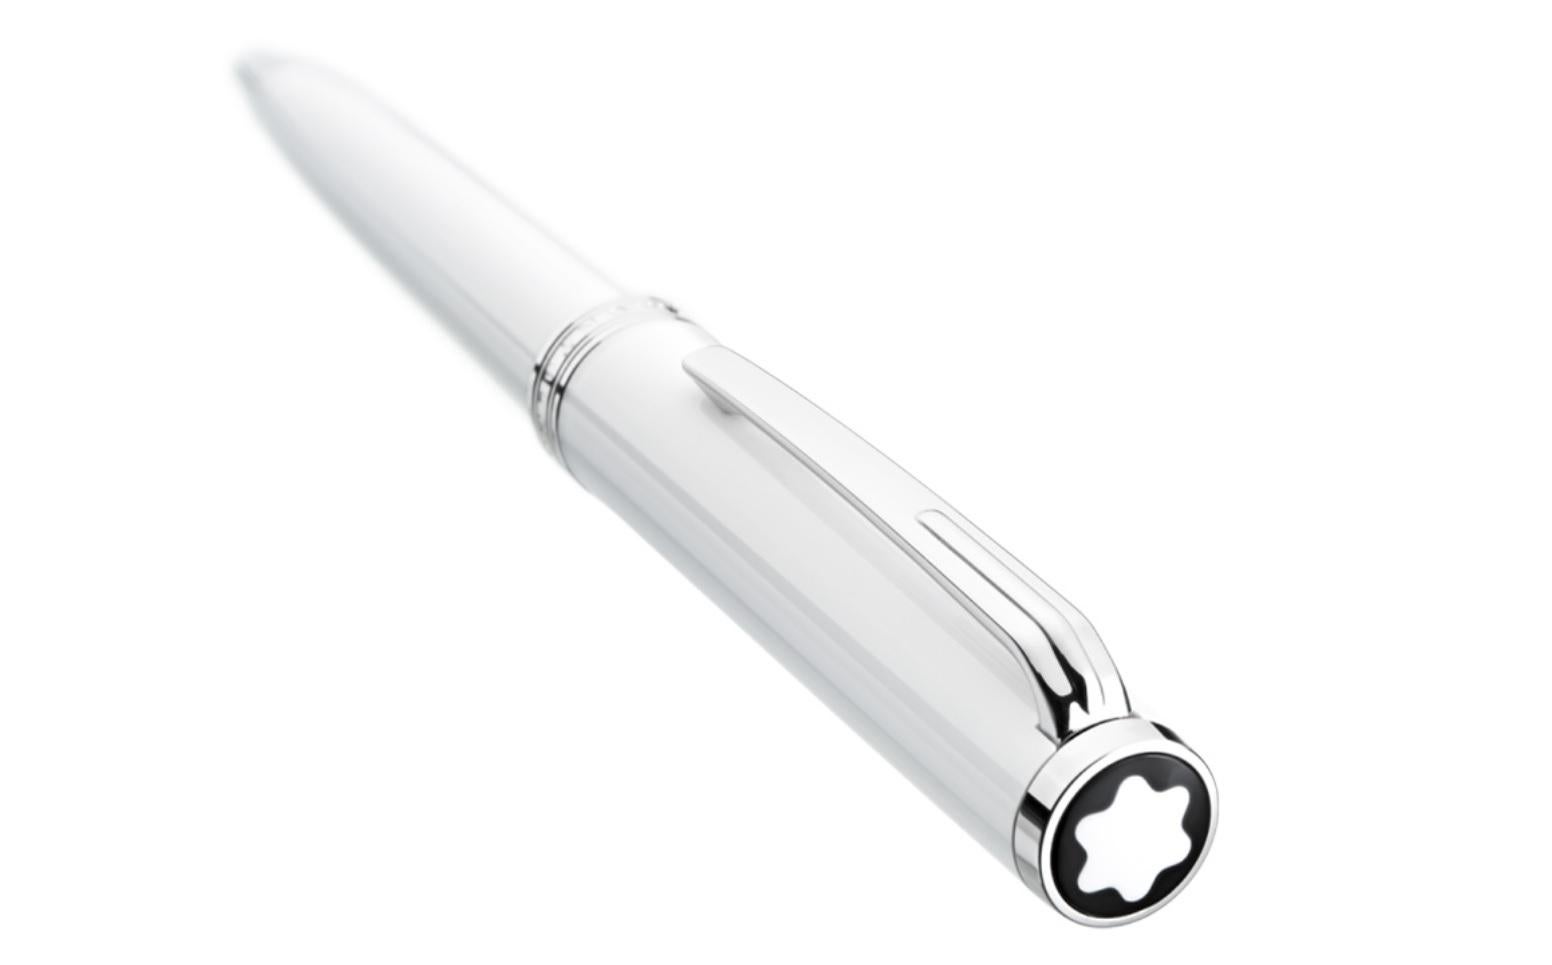 A Montblanc ballpoint pen inspired by the German Bauhaus style of architecture. It features a clean and modern silhouette, crafted in a white resin cap and barrel with platinum-coated trim and fittings.